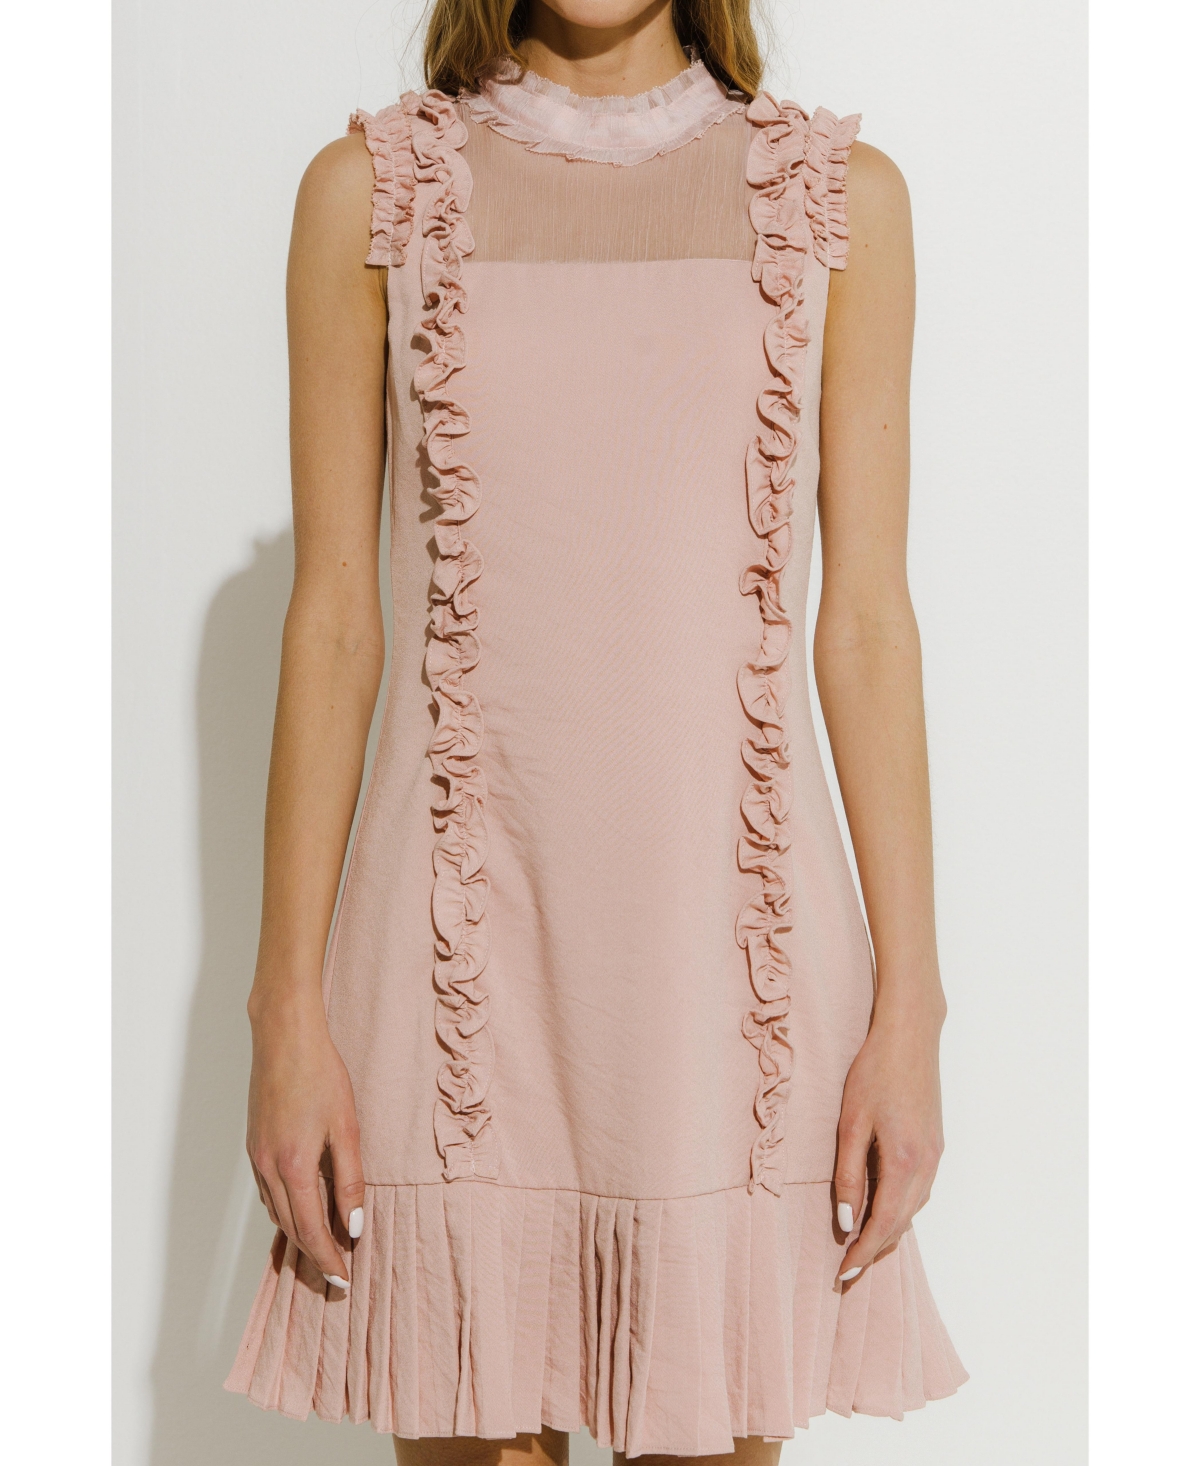 Women's Mixed Media A Line Dress with Ruffle Details - Powder pink